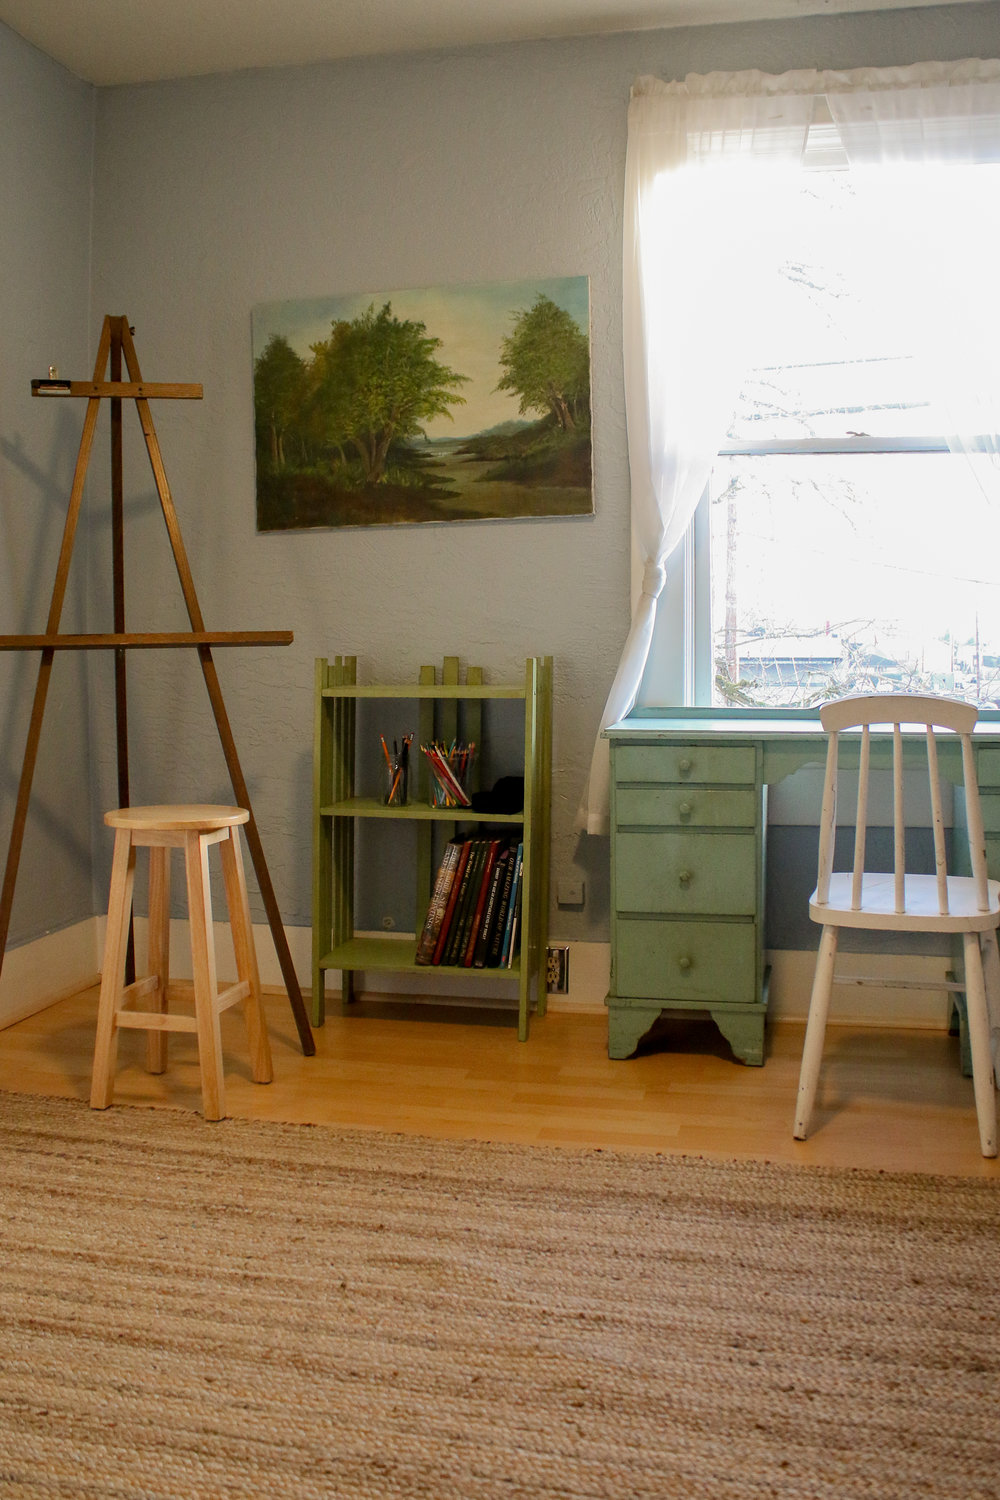 From reference books to easels the Dandelion Creative Space in downtown Chehalis offers artists both space and supplies to express themselves.